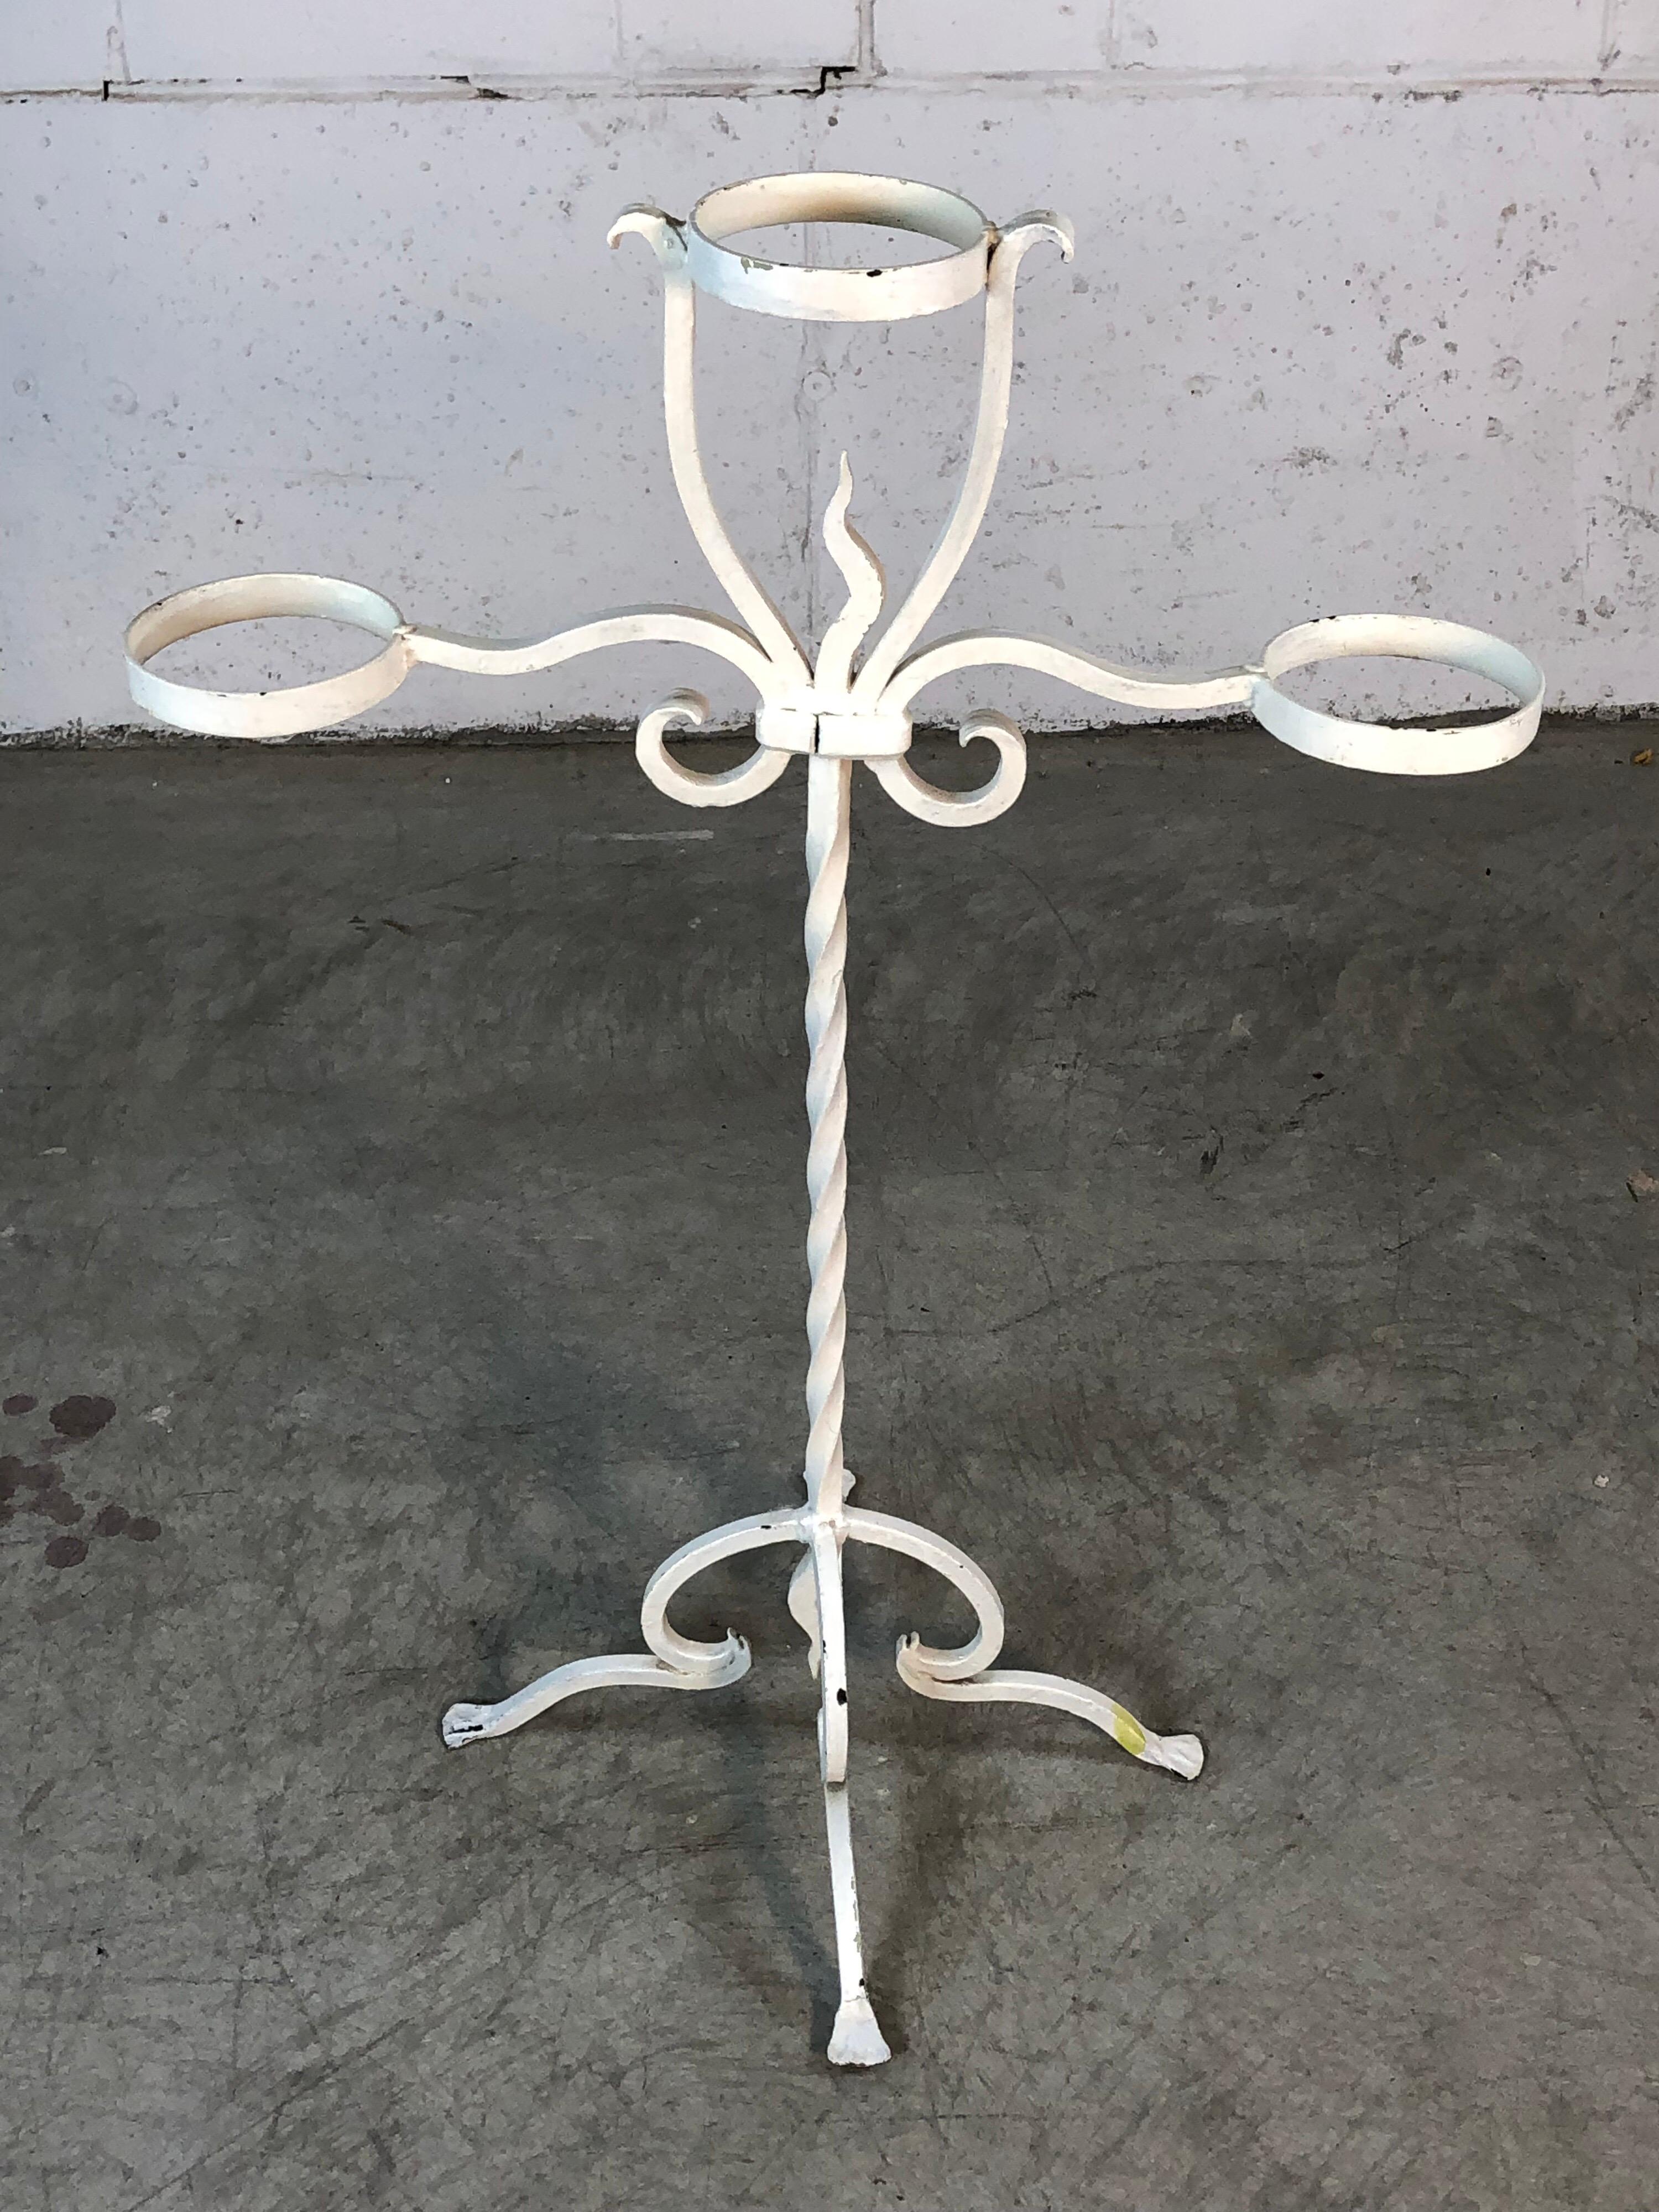 1950s solid wrought iron plant stand that holds three flower pots. The stand has been painted white and is very heavy. Has really nice decorative accents. No maker’s mark. Holds a 5”diameter pot, pot shown is not included.